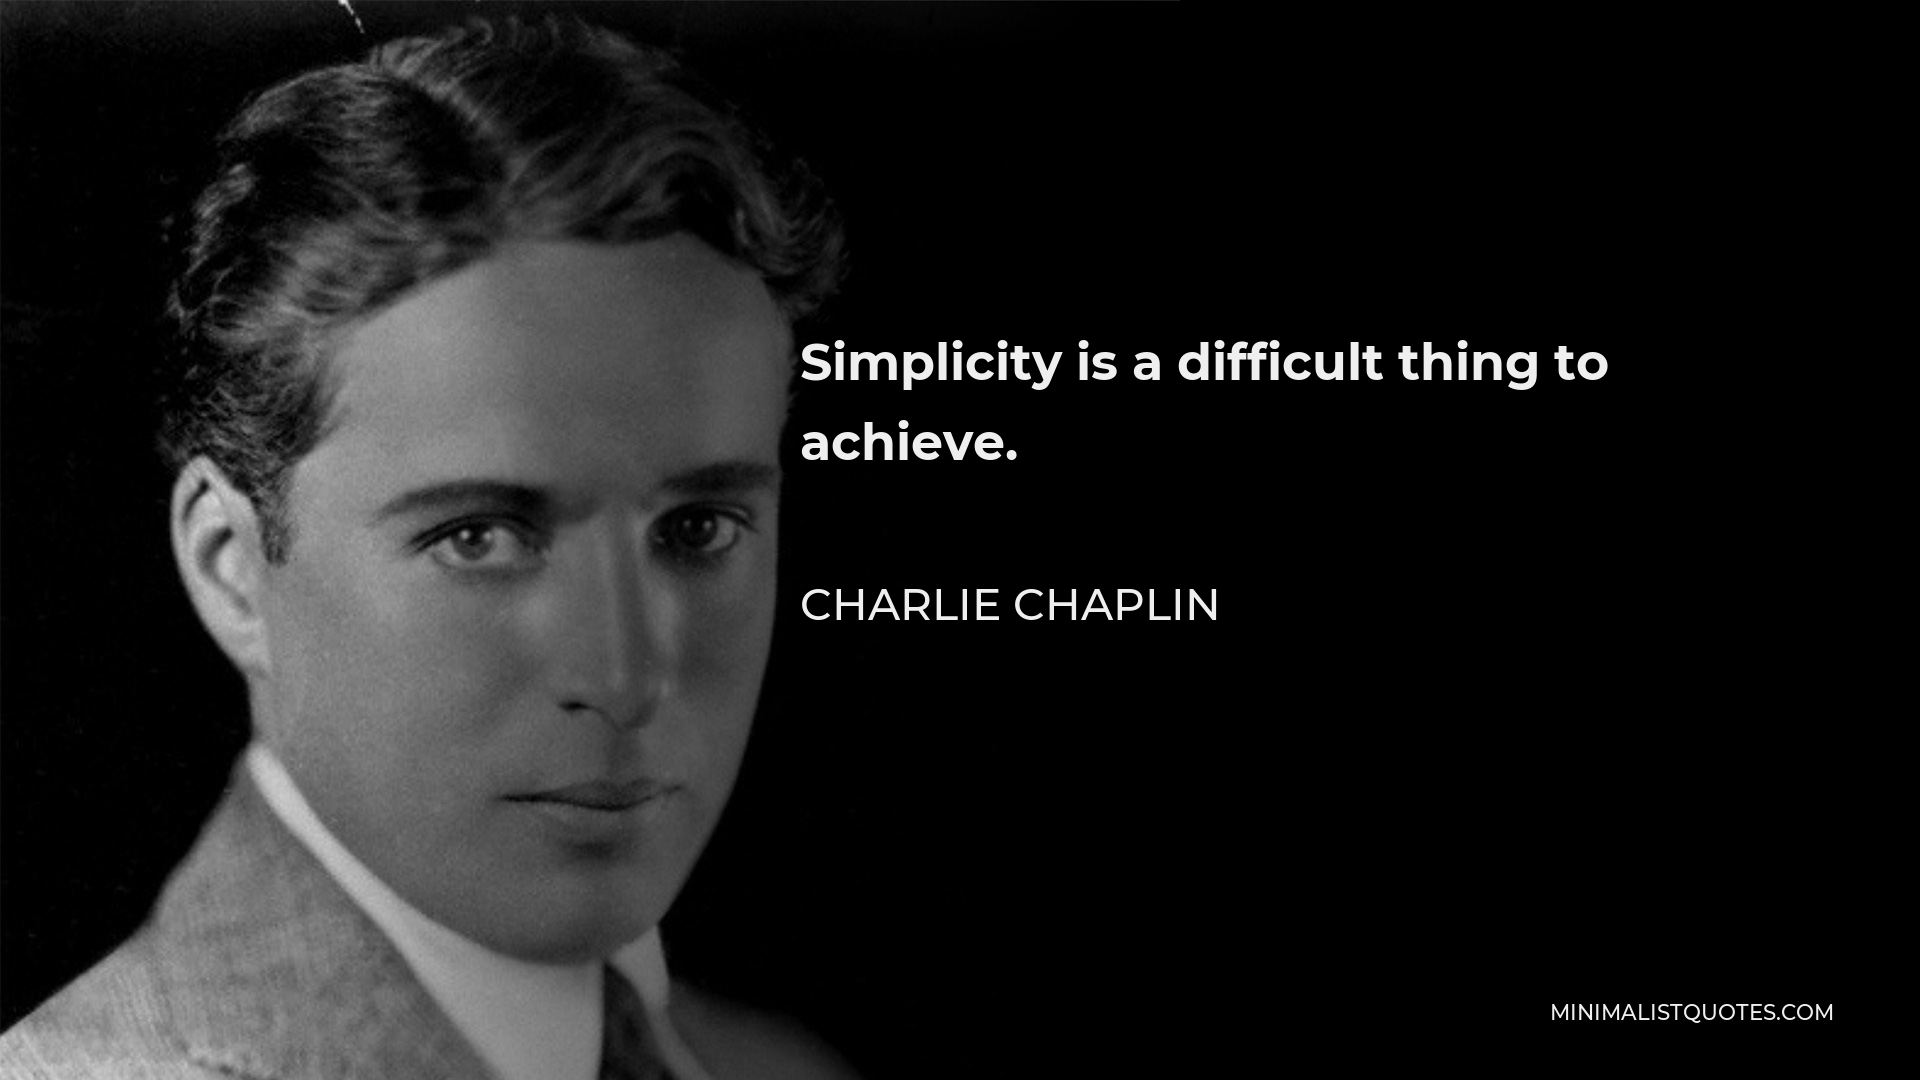 Charlie Chaplin Quote - Simplicity is a difficult thing to achieve.